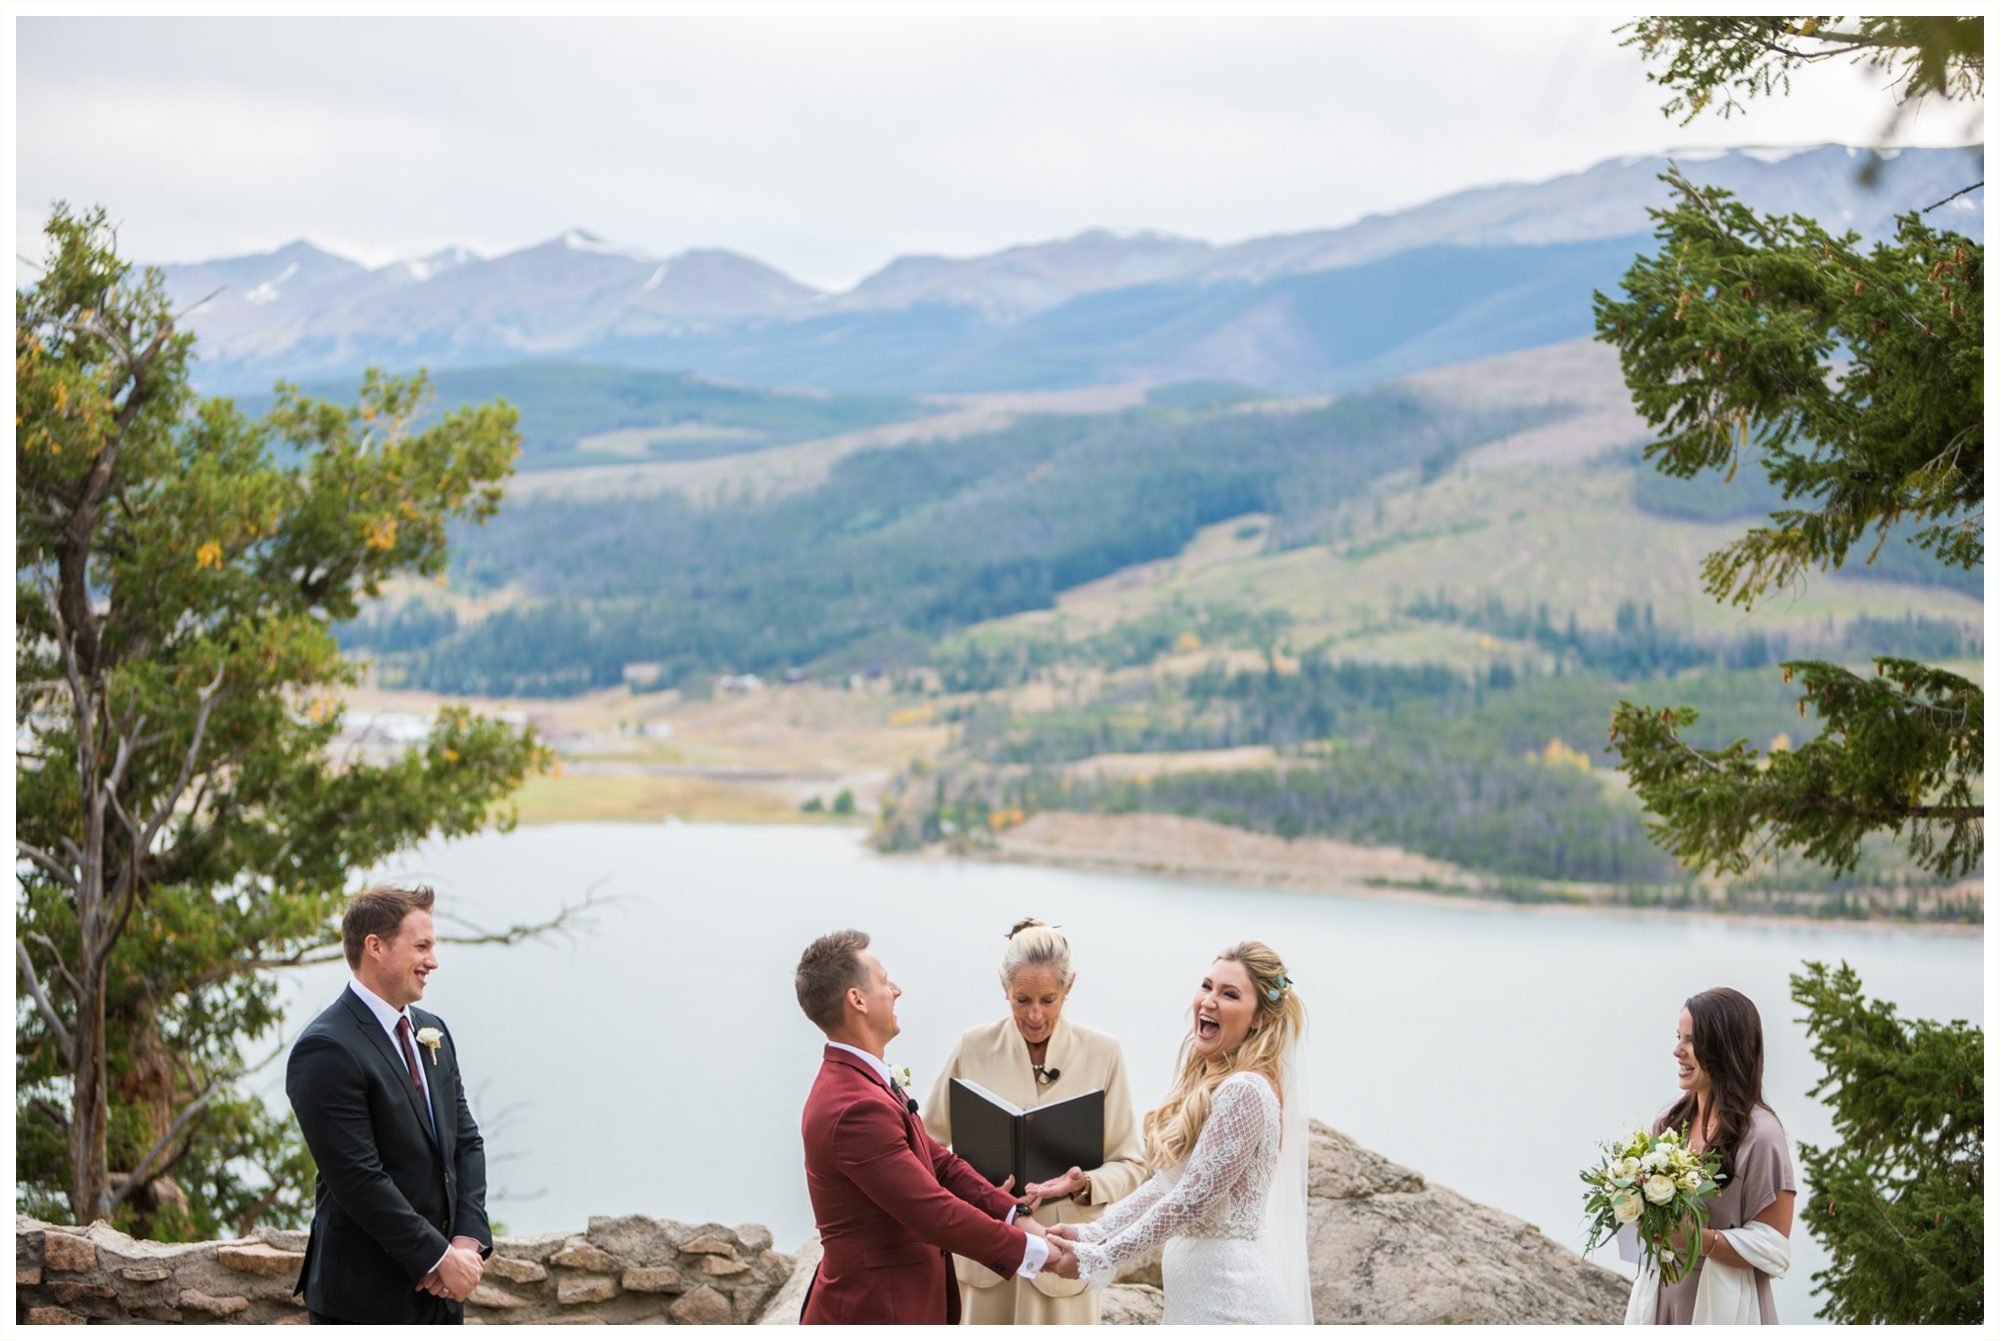 wedding ceremony at sapphire point elopement breckenridge wedding photographer kathryn kim bride and groom laugh candidly